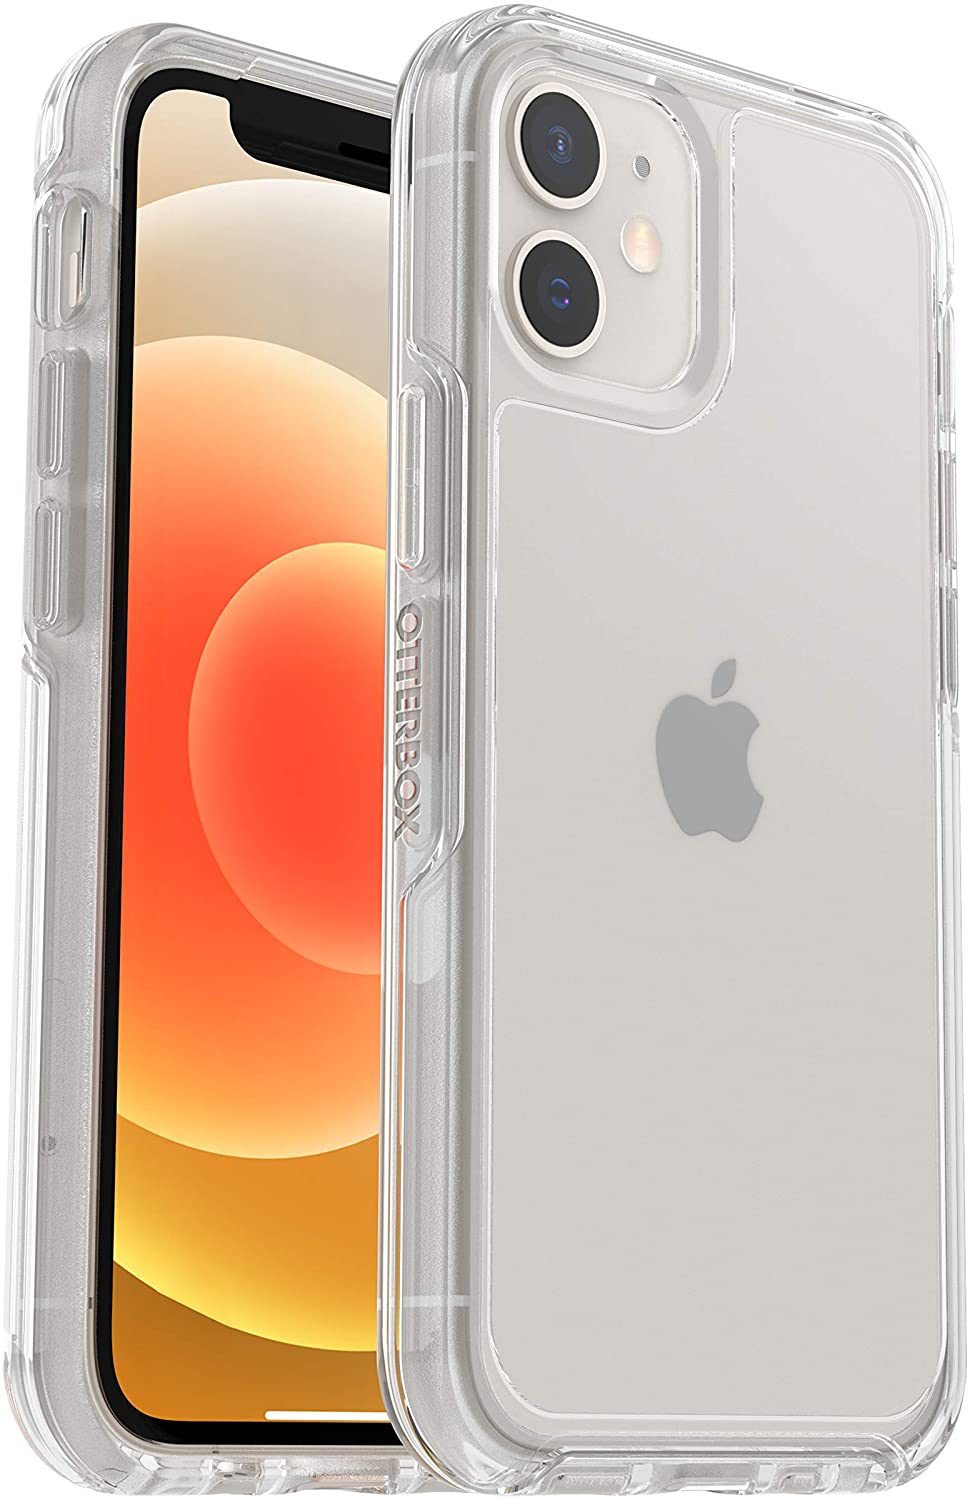 OtterBox SYMMETRY SERIES Clear Case for Apple iPhone 12 Mini - Clear (Certified Refurbished)